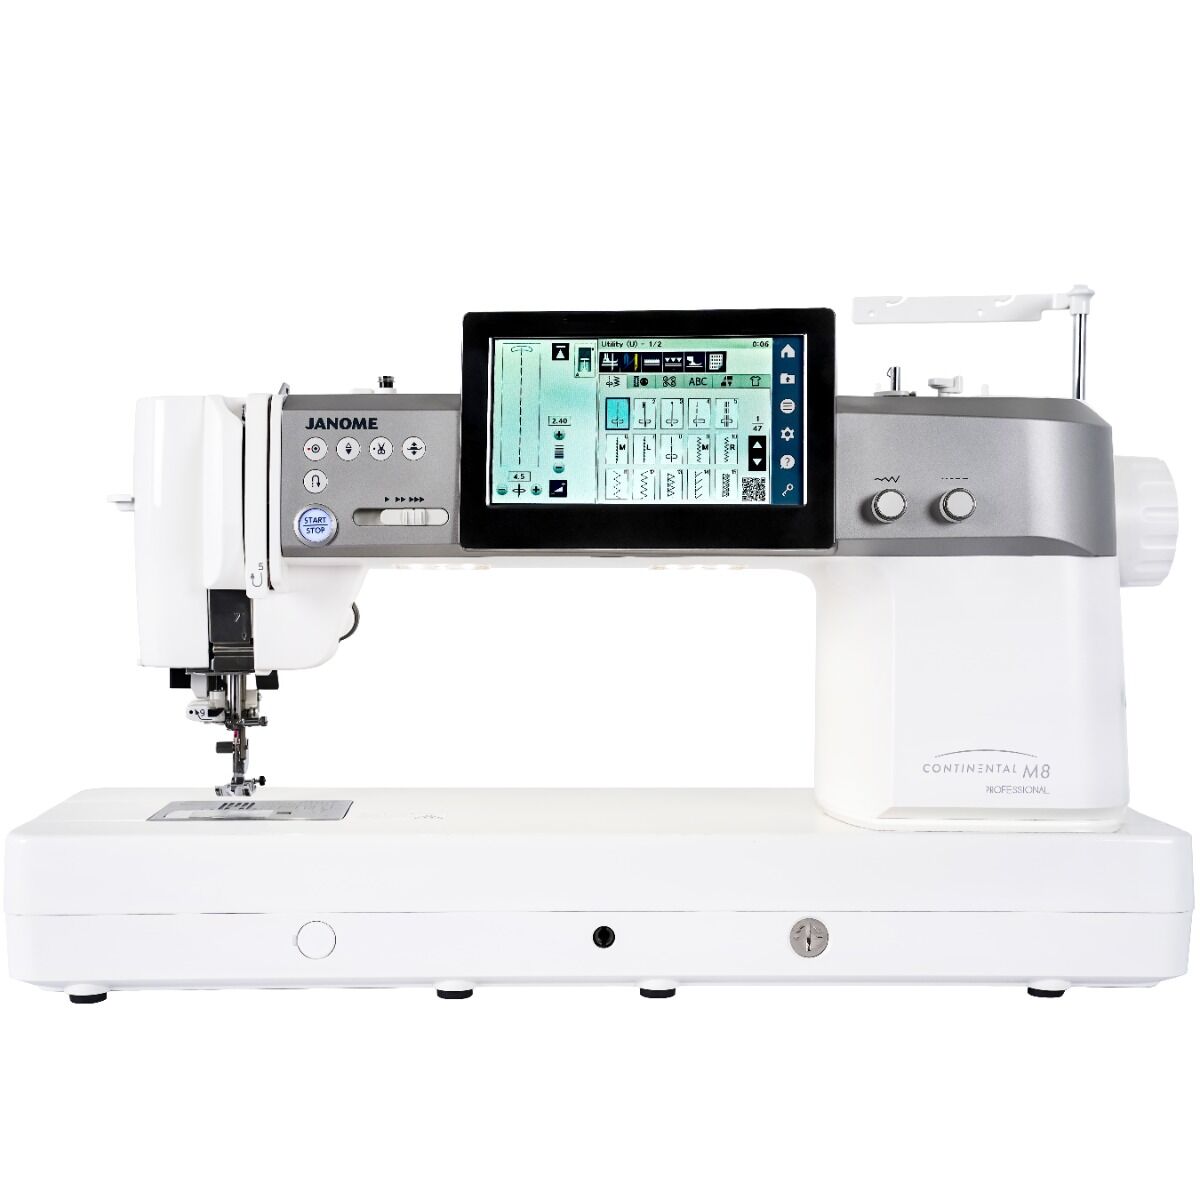 `,Janome Continental M8 Professional Quilting & Sewing Machine,Janome Continental M8 Professional Quilting & Sewing Machine, Janome Continental M8 Professional Quilting & Sewing Machine With A.S.R. (Accurate Stitch Regulator),,,,,Janome Continental M8 Professional Quilting & Sewing Machine